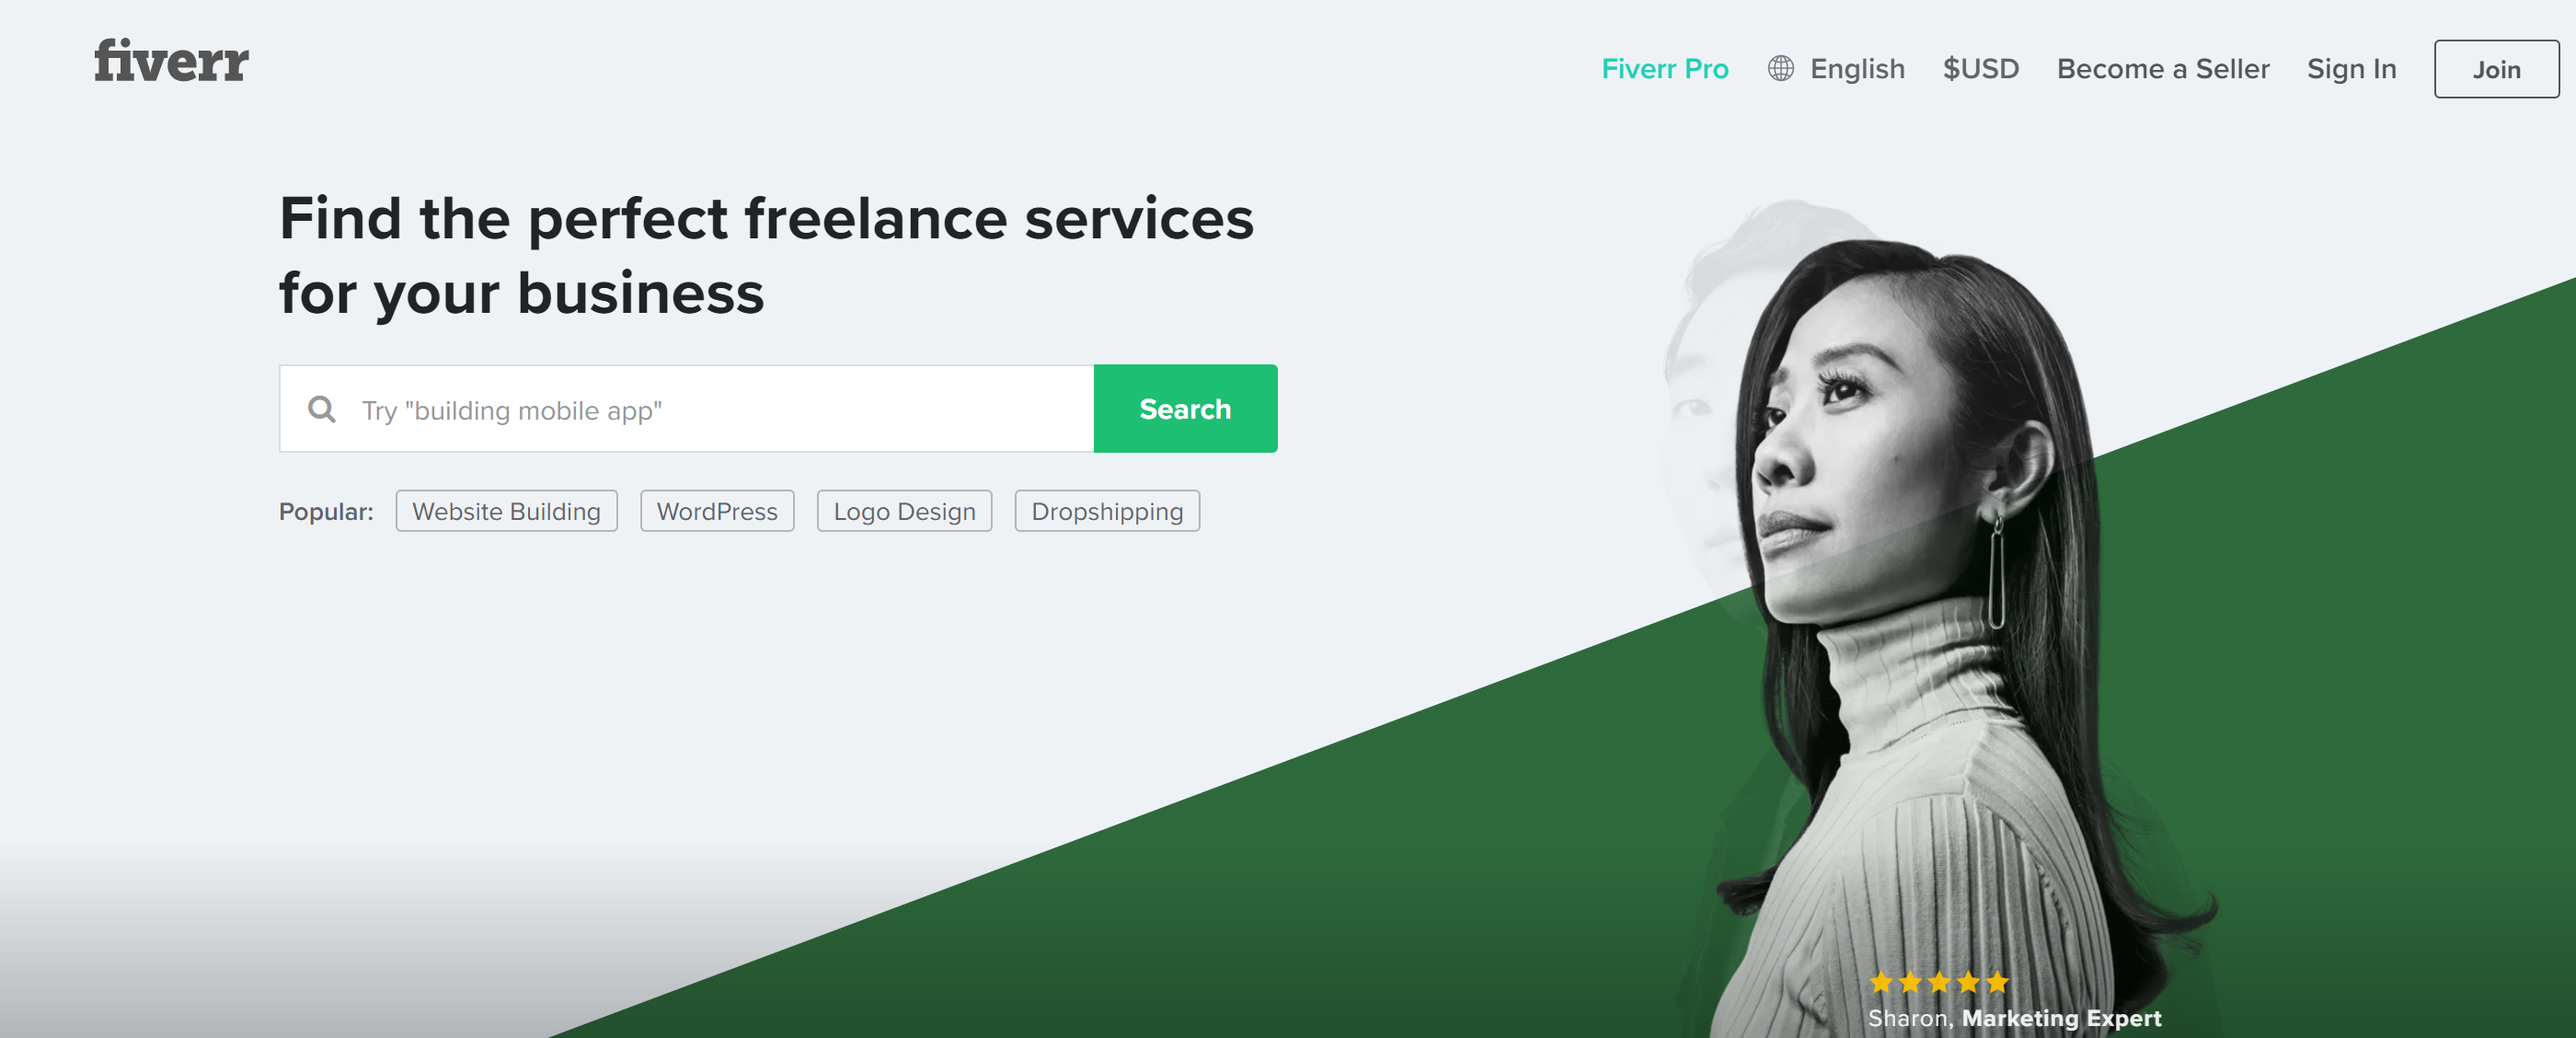 Fiverr: Most beneficial freelancing sites for beginners in 2021